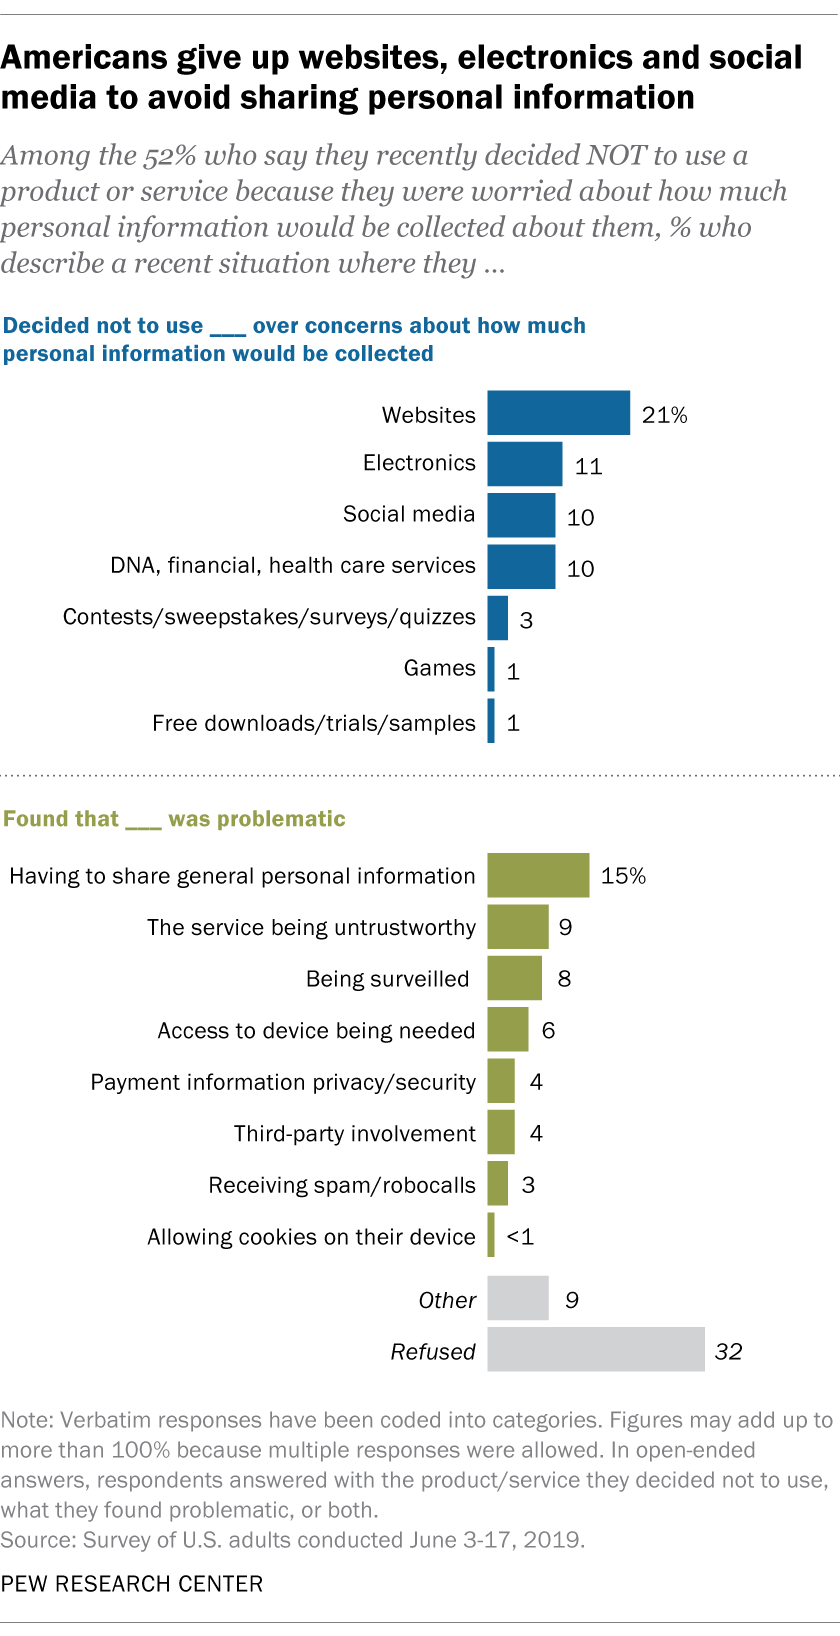 Americans give up websites, electronics and social media to avoid sharing personal information